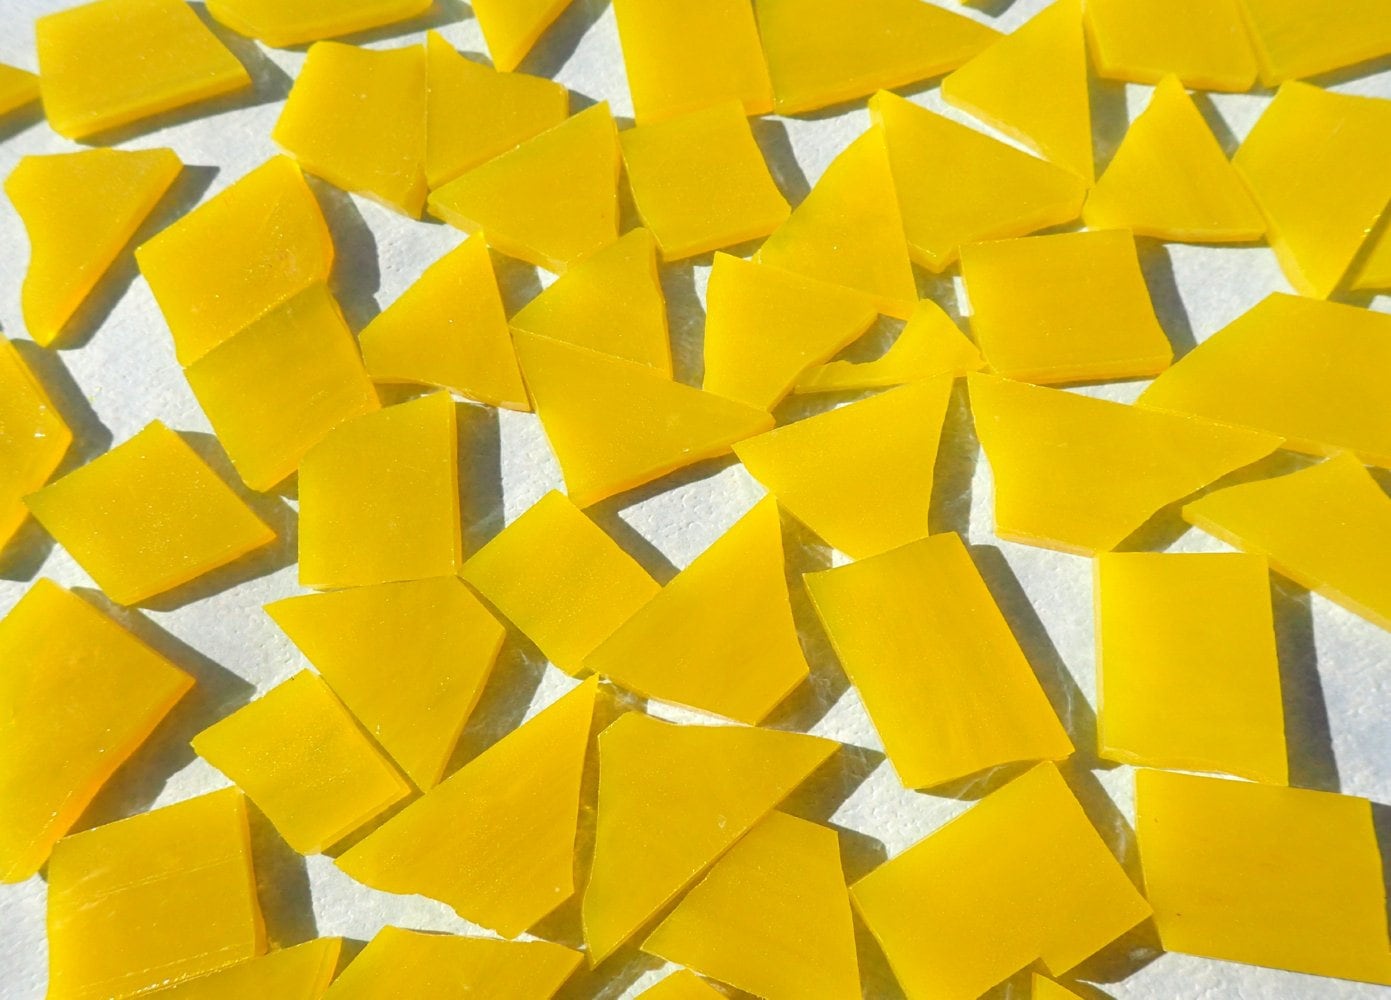 Stained Glass Mosaic Tiles in Sunshine Yellow - 1/2 Pound - 5-15 mm Various Shapes